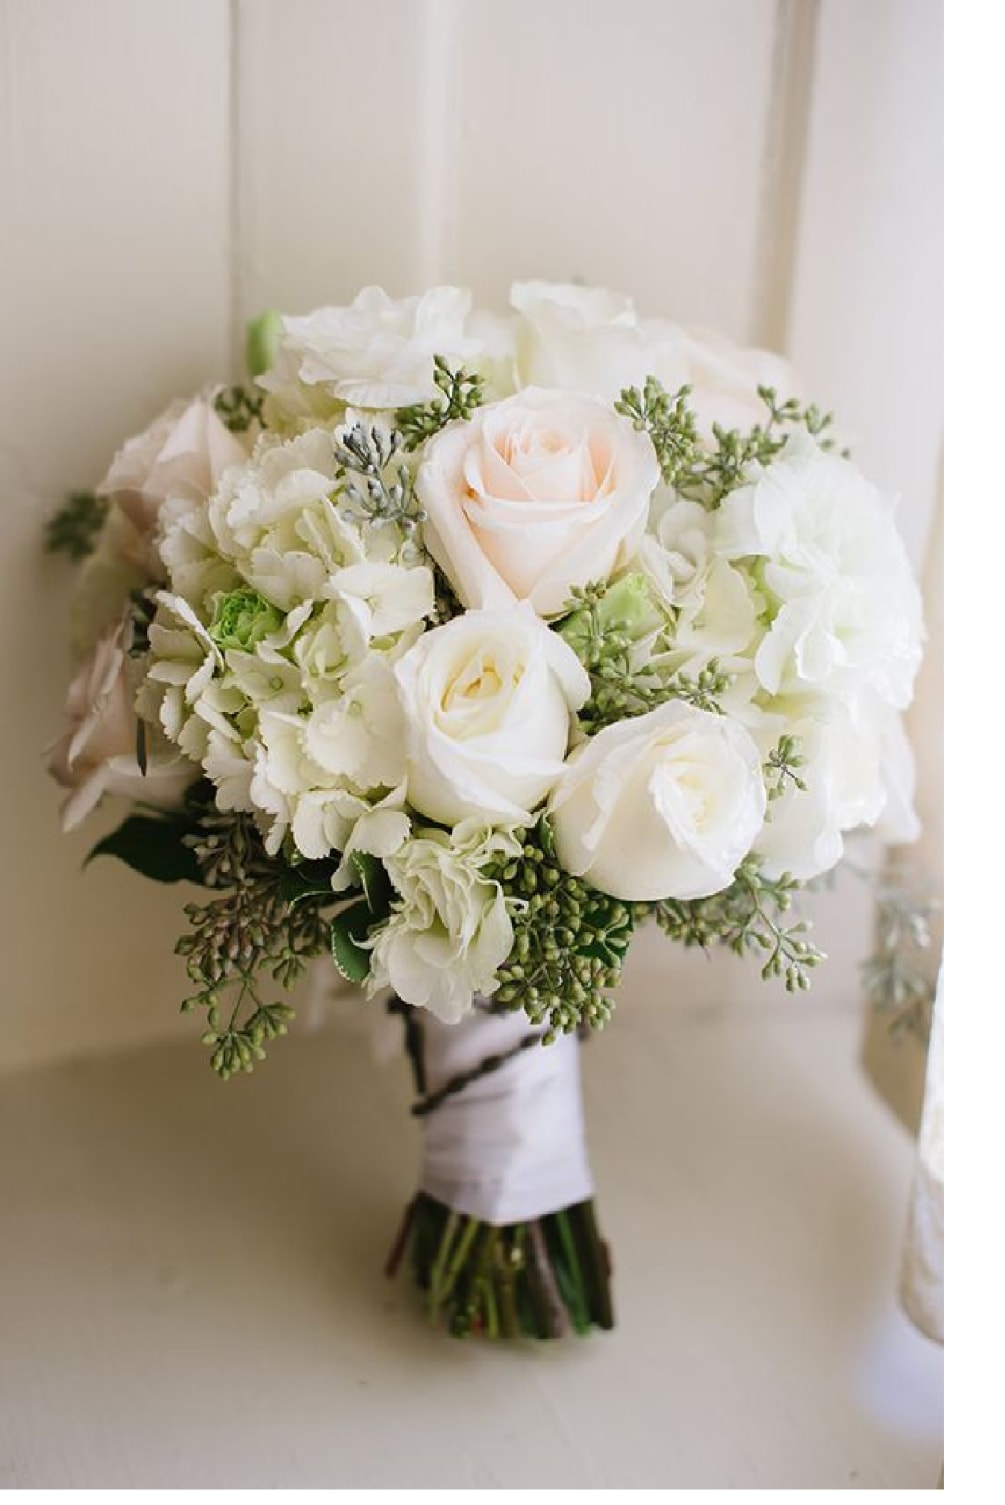 Traditional wedding flowers never go out of style